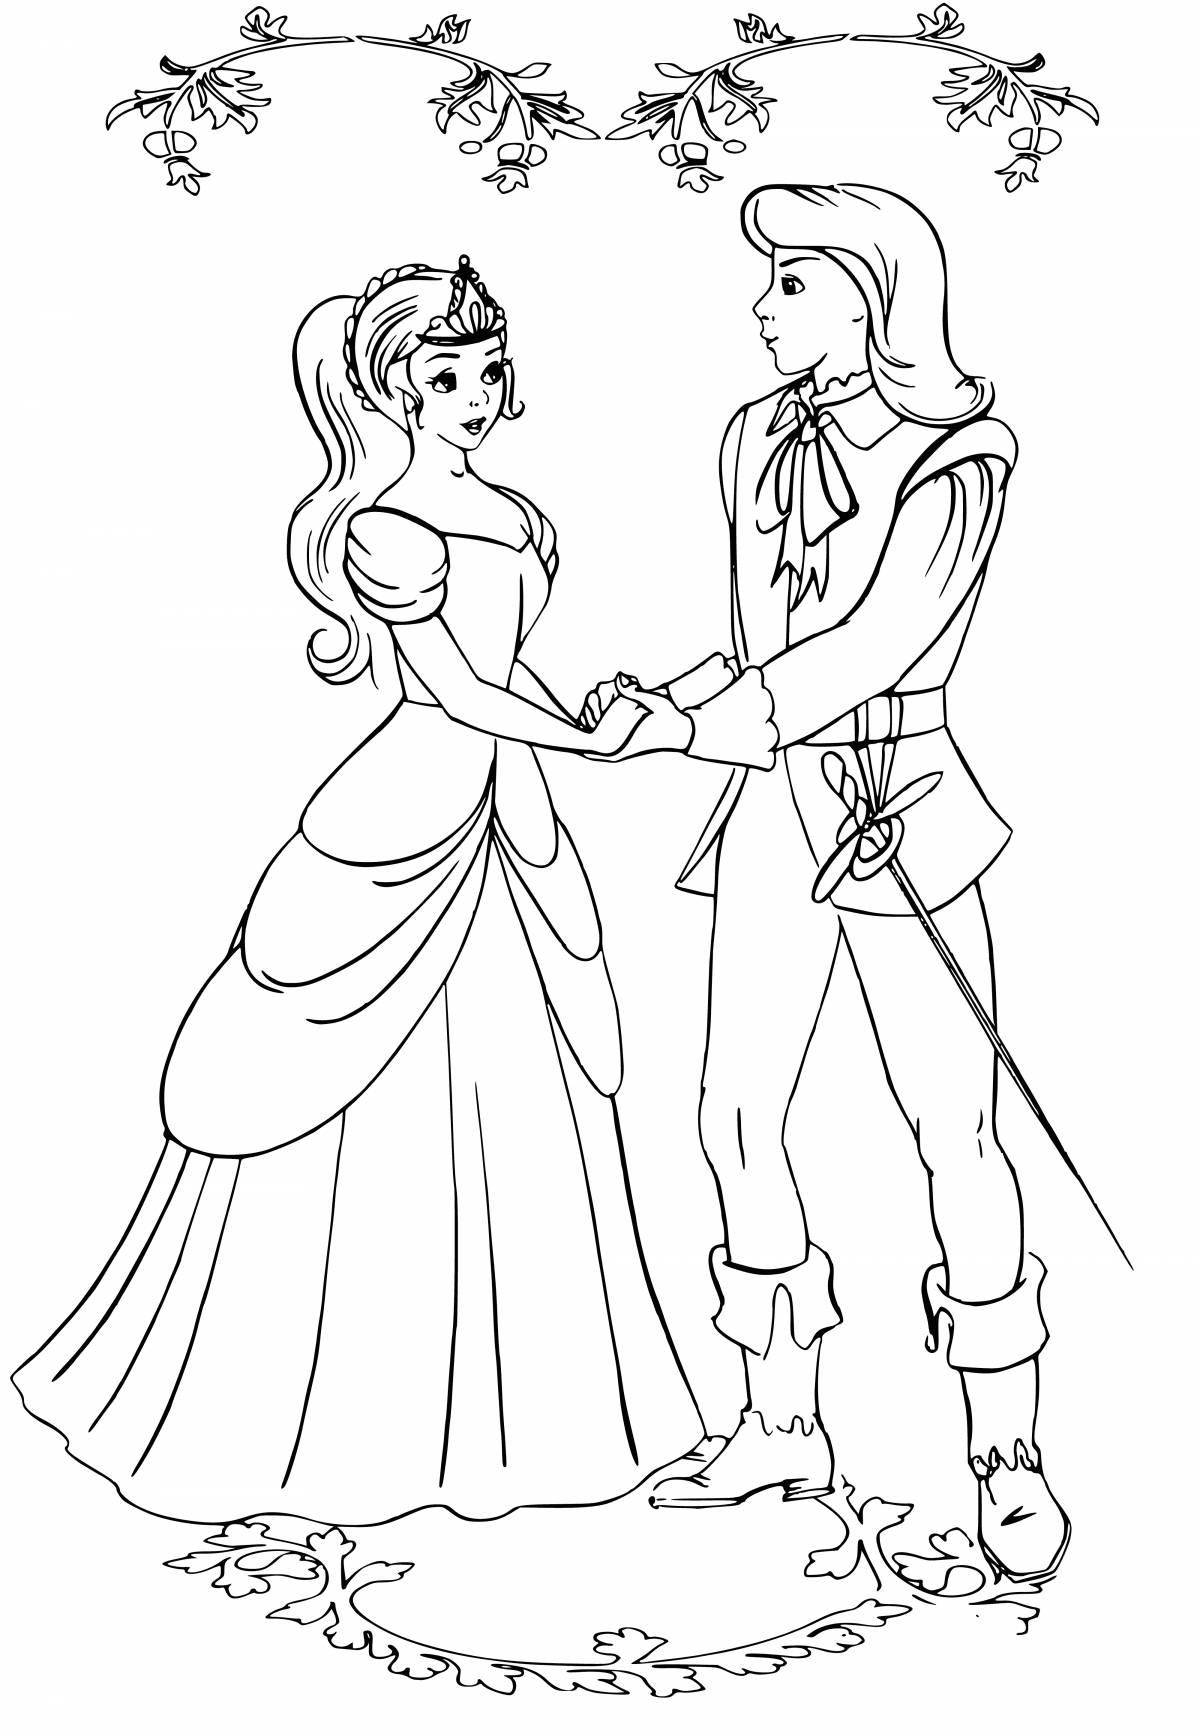 Fancy prince and princess coloring page